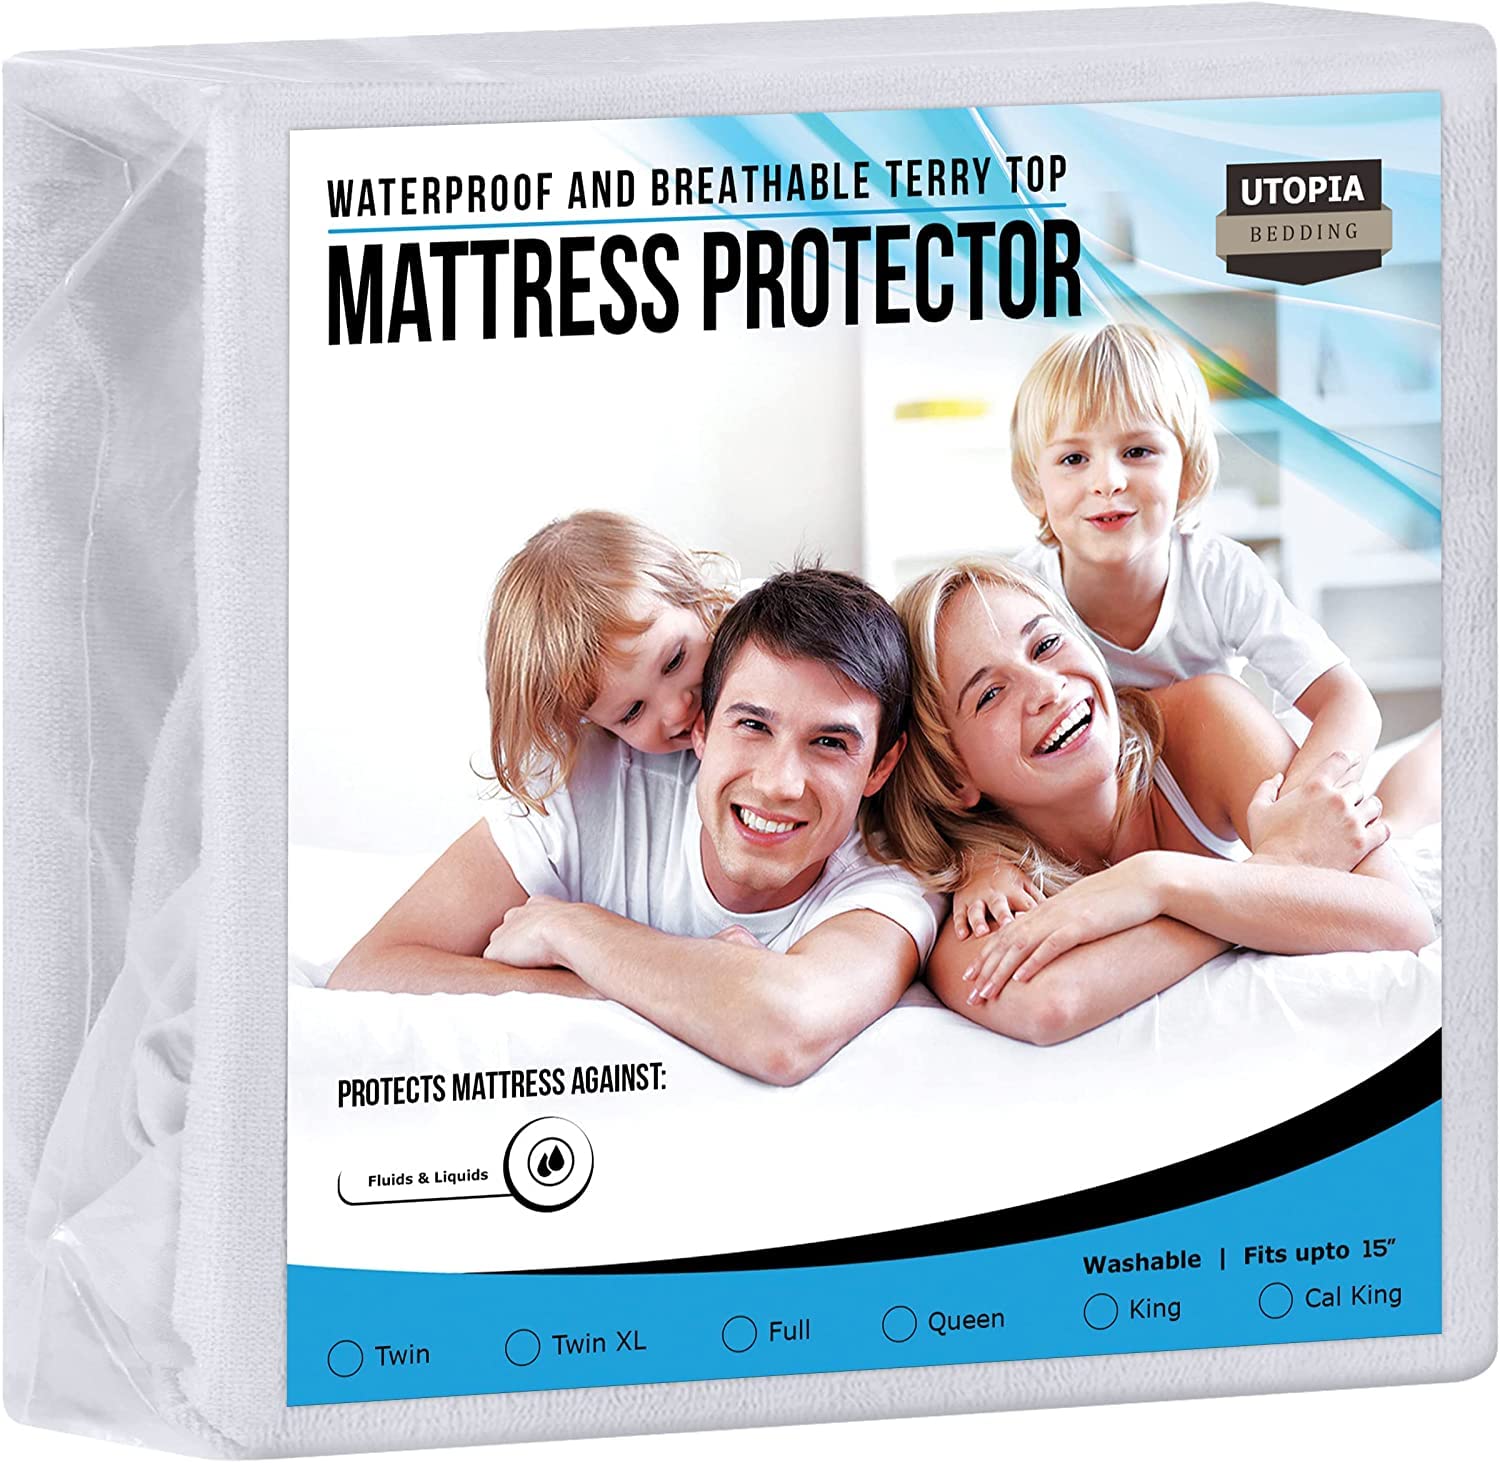 Book Cover Utopia Bedding Premium Waterproof Terry Mattress Protector Twin 200 GSM, Mattress Cover, Breathable, Fitted Style with Stretchable Pockets (White) White Twin